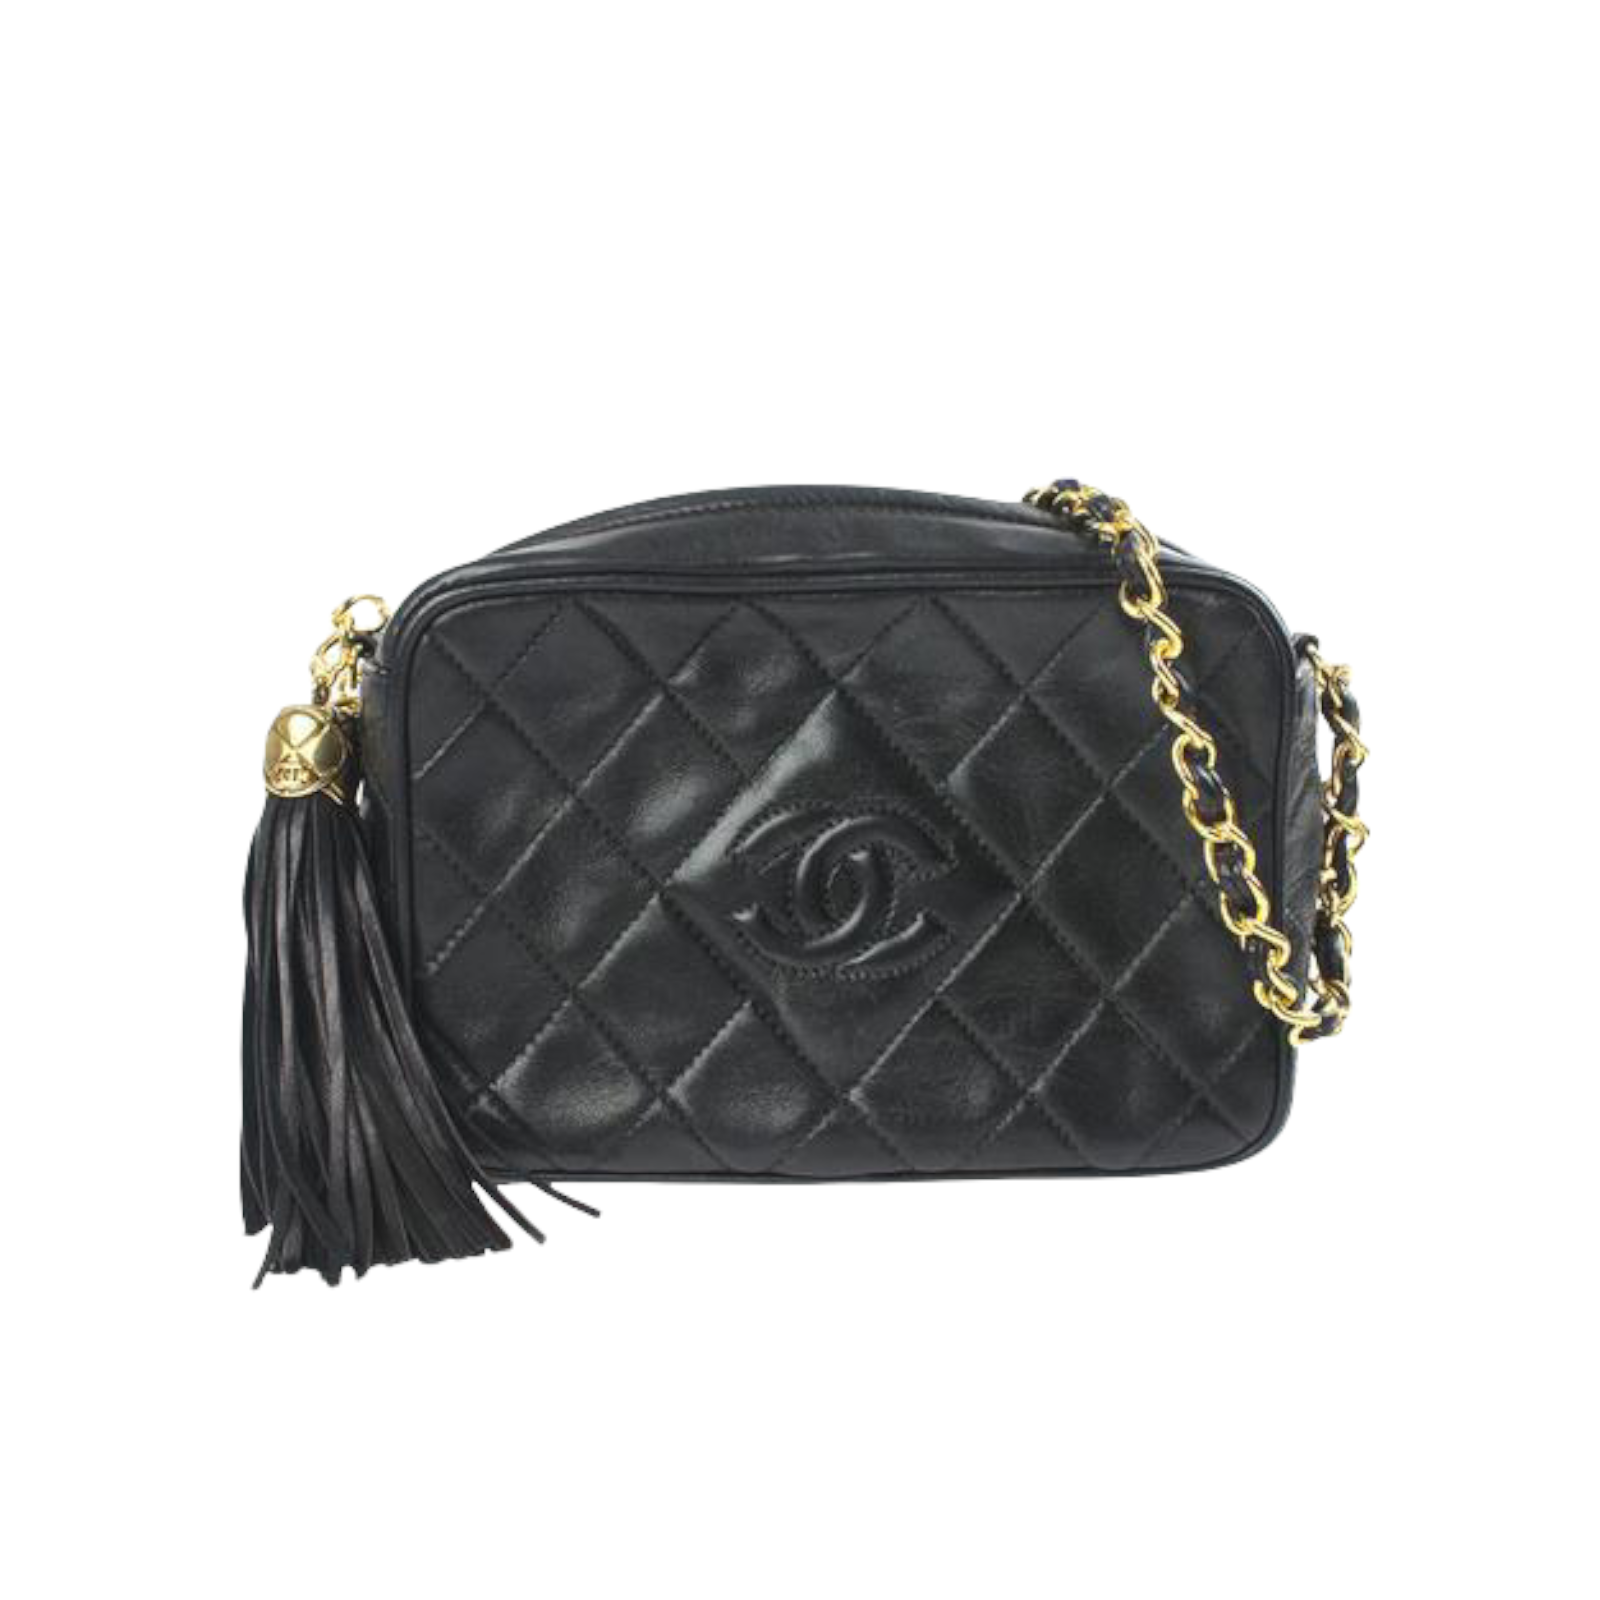 Chanel Gabrielle - 154 For Sale on 1stDibs  chanel gabrielle medium,  chanel gabrielle backpack, chanel gabrielle bag